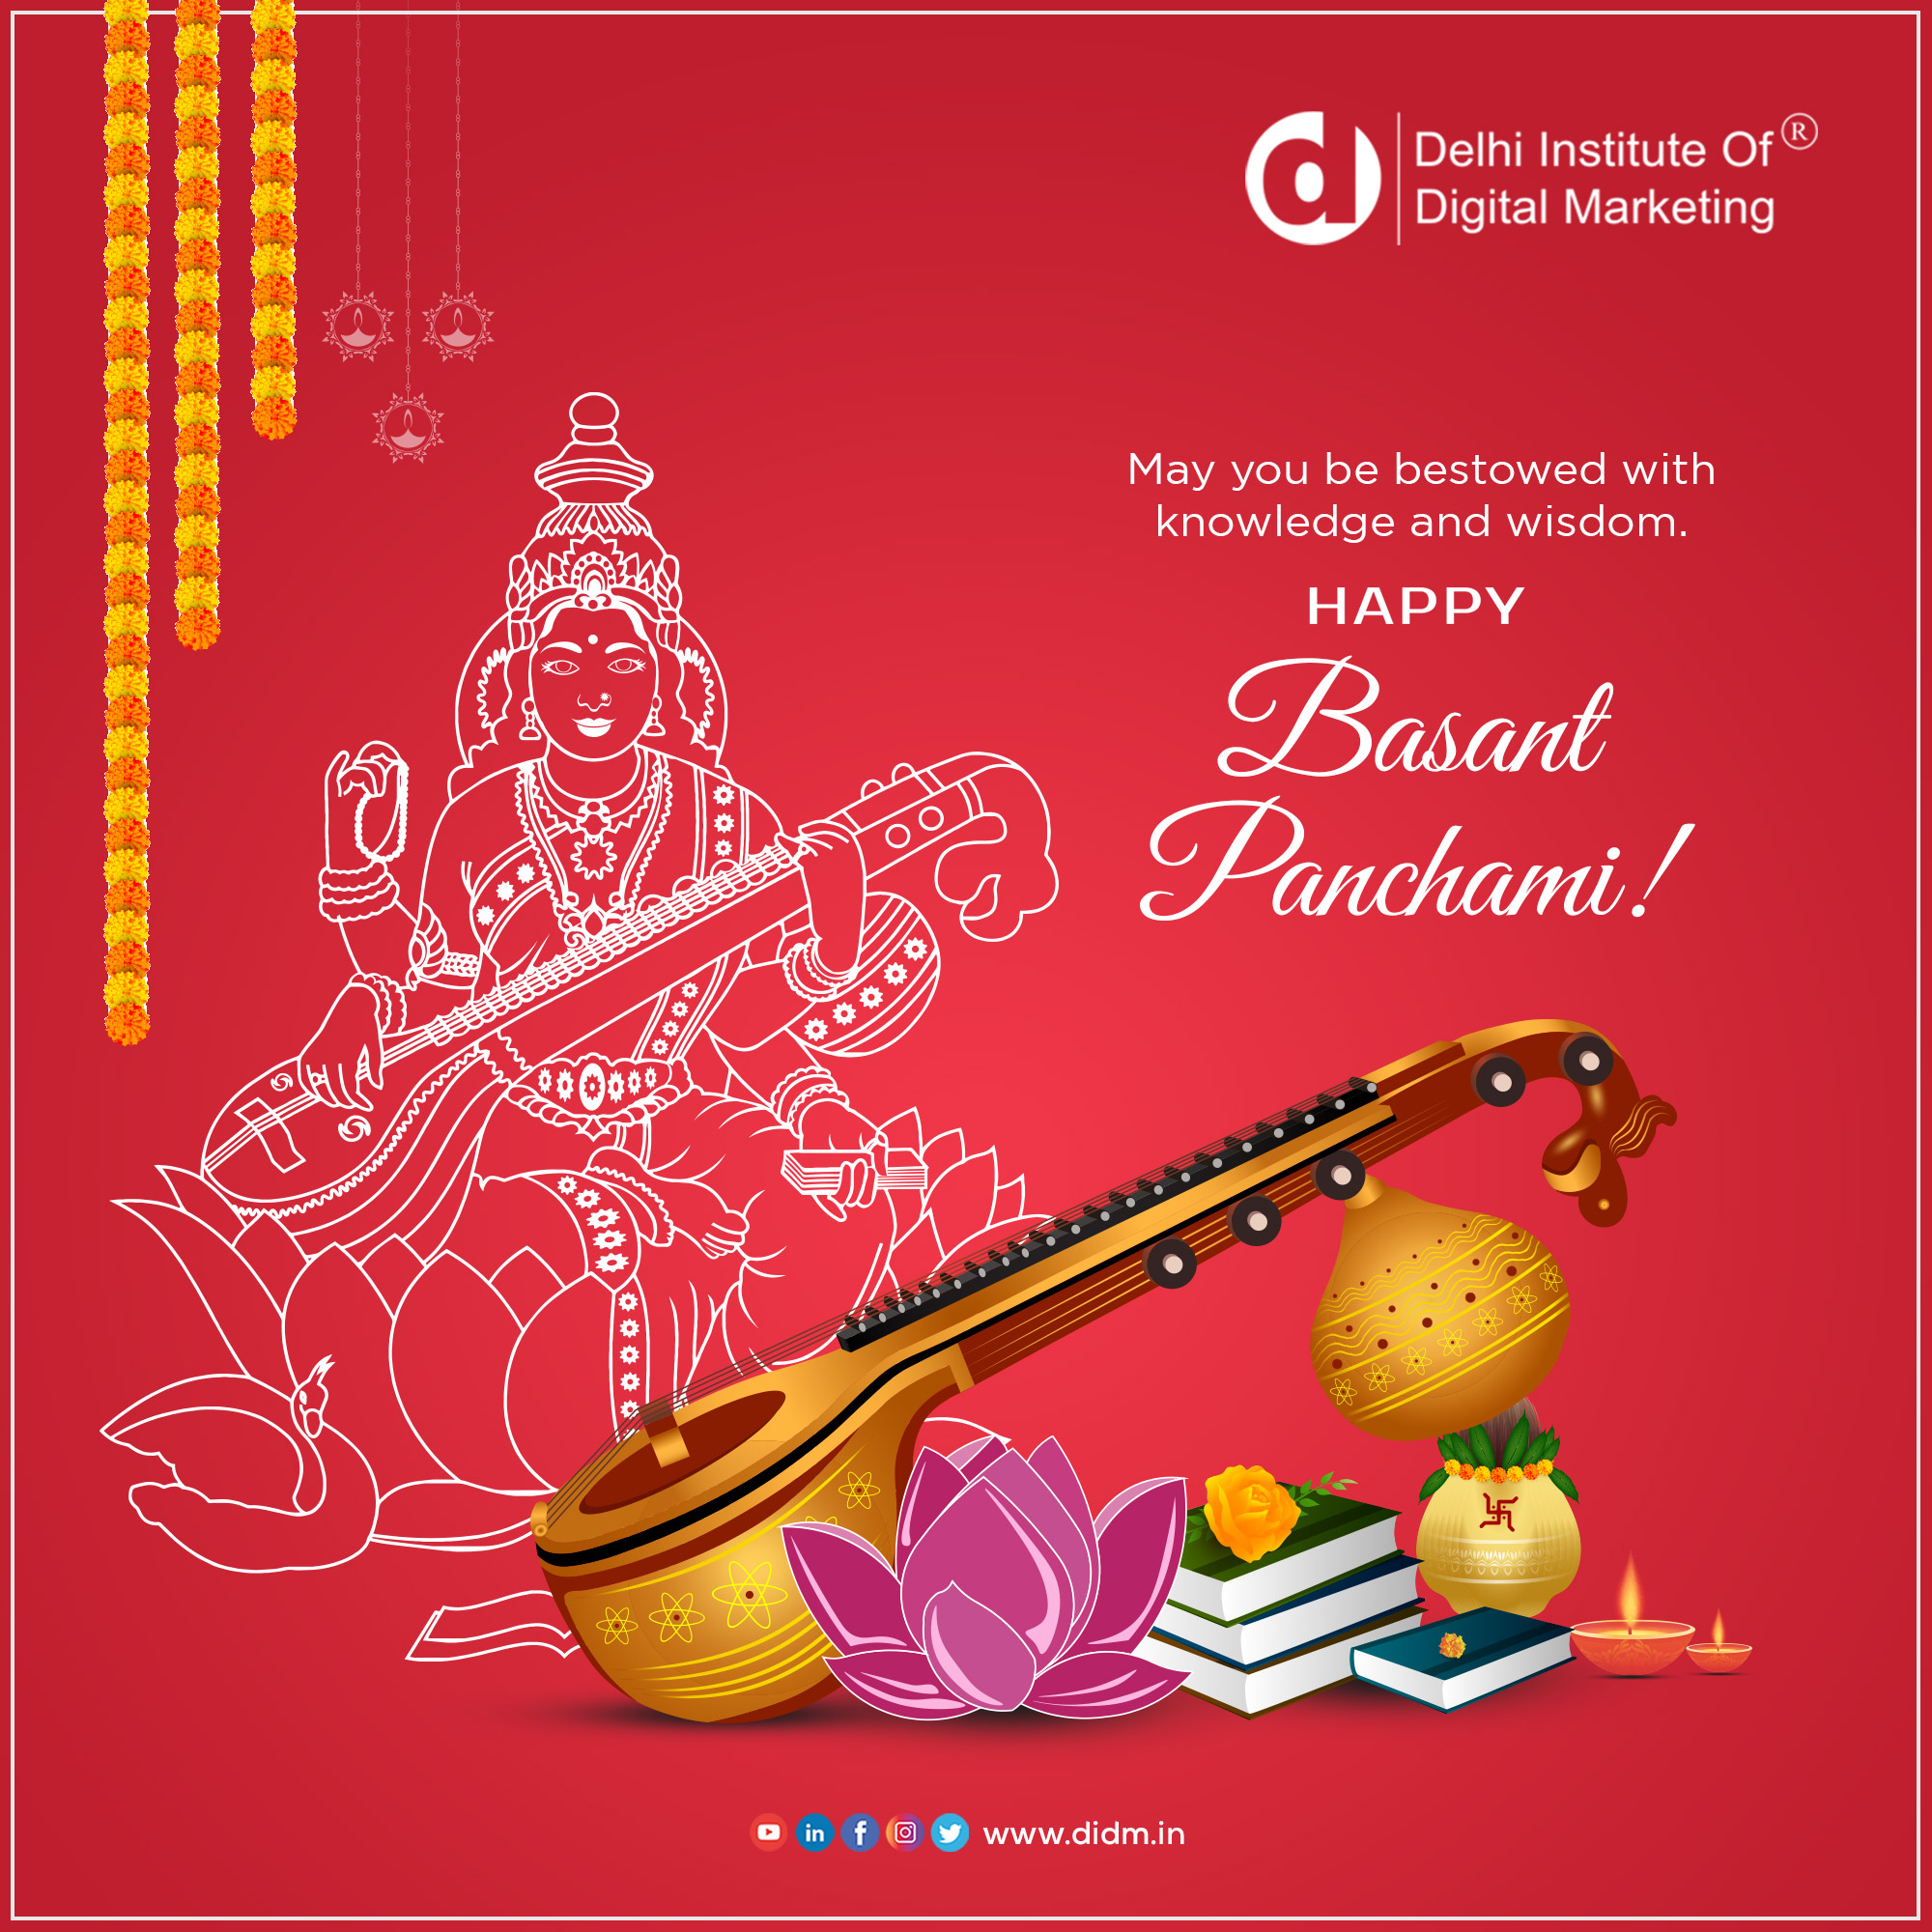 DIDM Wishes You A Very Happy Basant Panchami